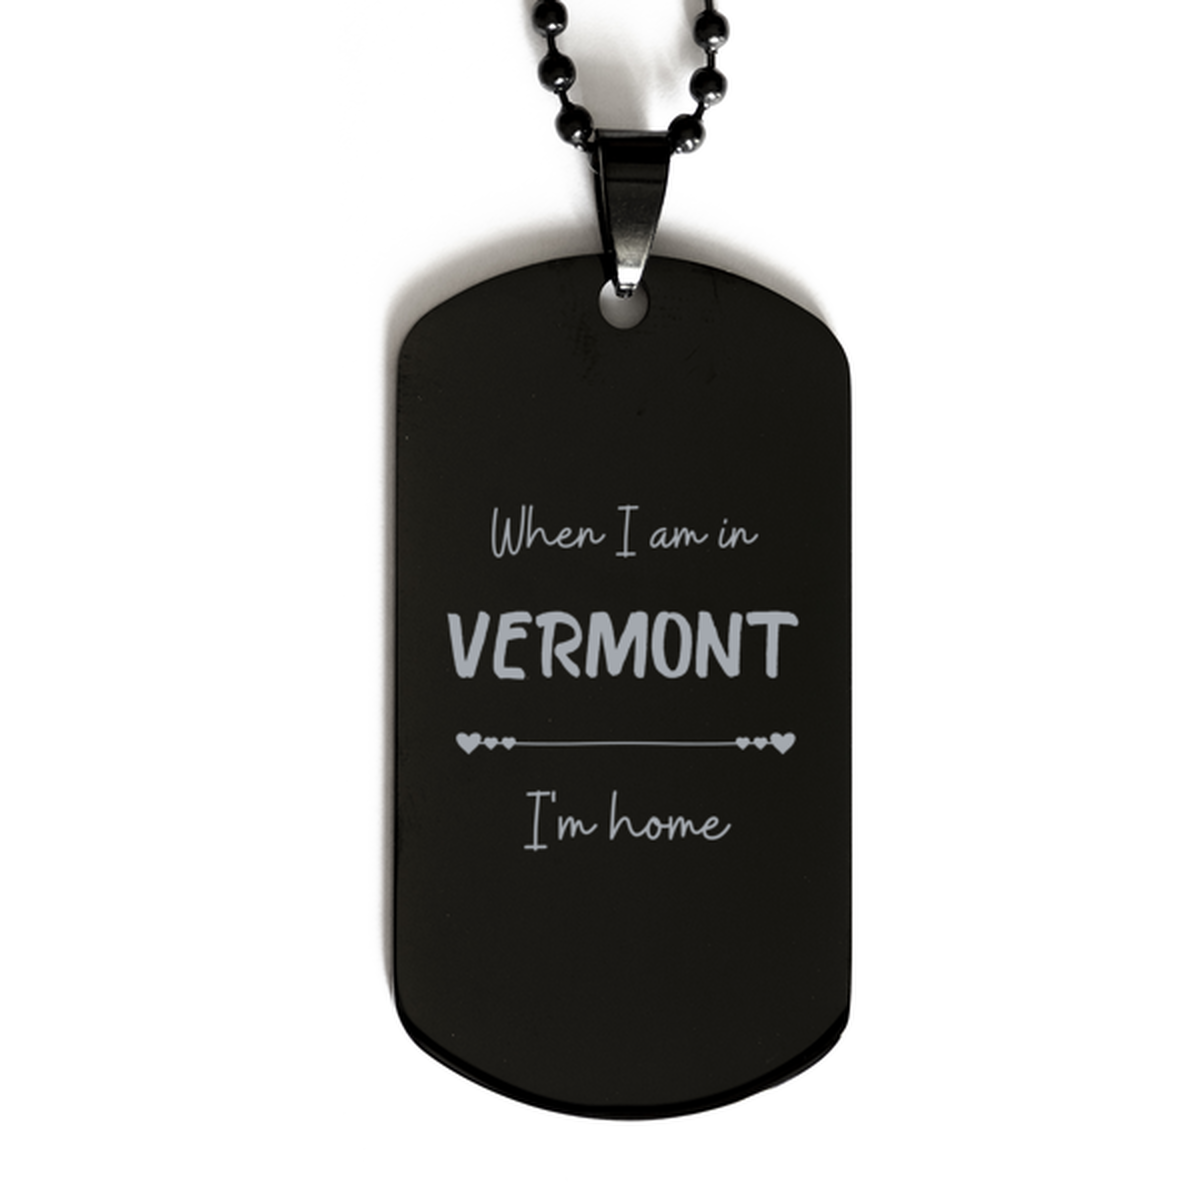 When I am in Vermont I'm home Black Dog Tag, Cheap Gifts For Vermont, State Vermont Birthday Gifts for Friends Coworker